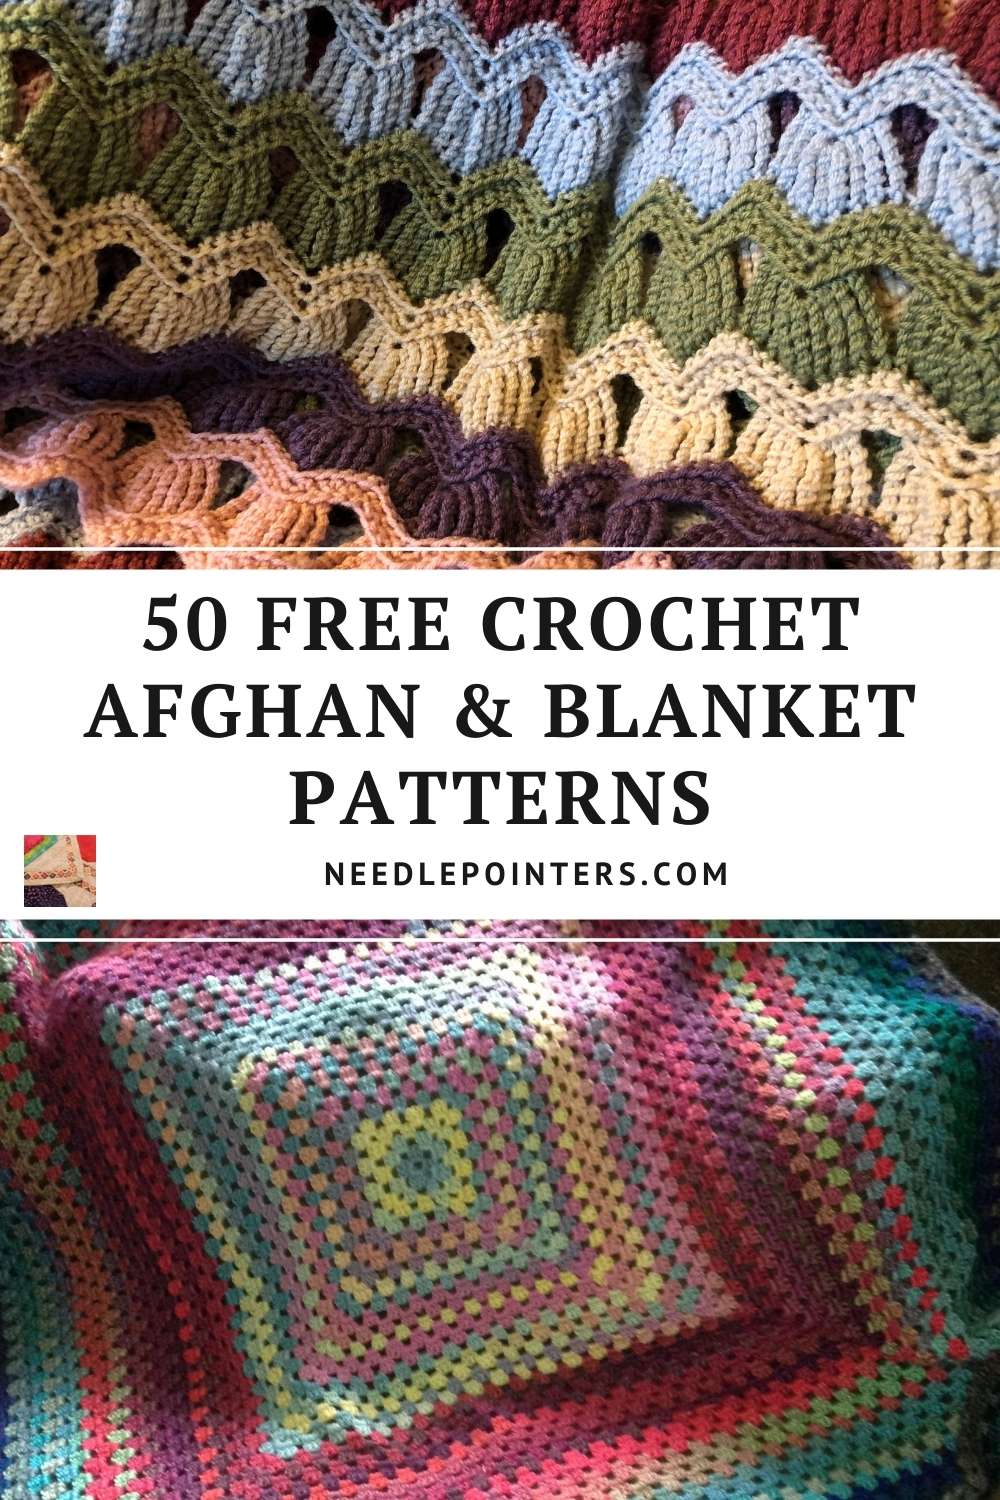 Over 60 FREE Patterns for Crochet Afghans and Blankets | Needlepointers.com